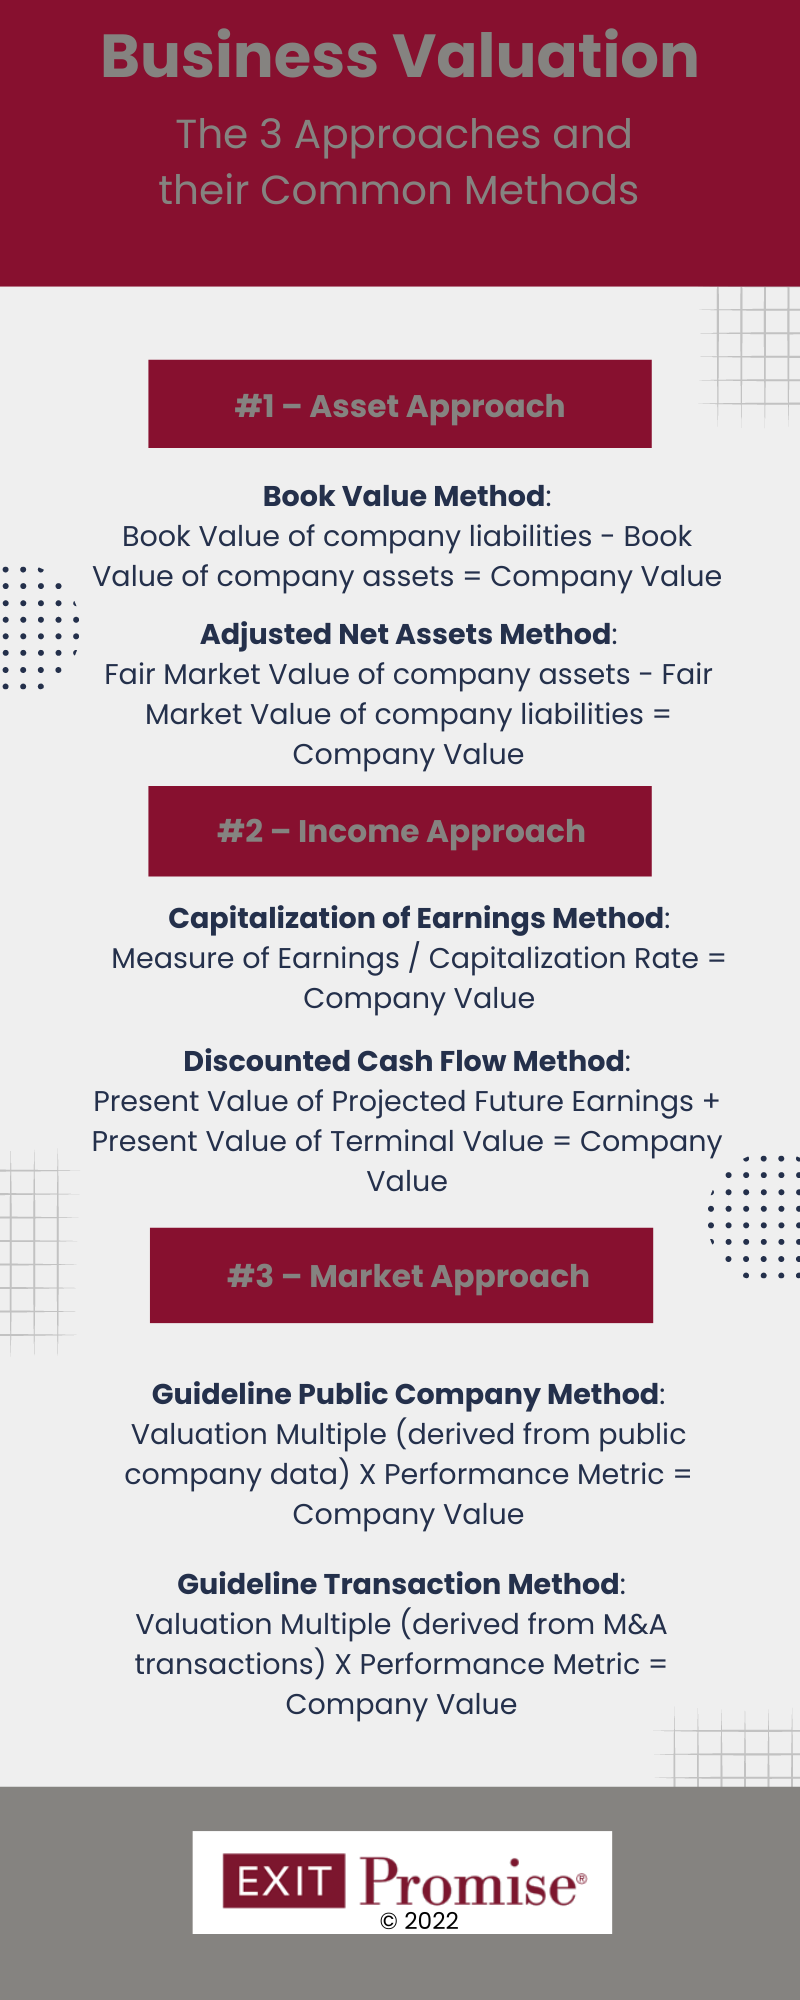 business valuation approaches